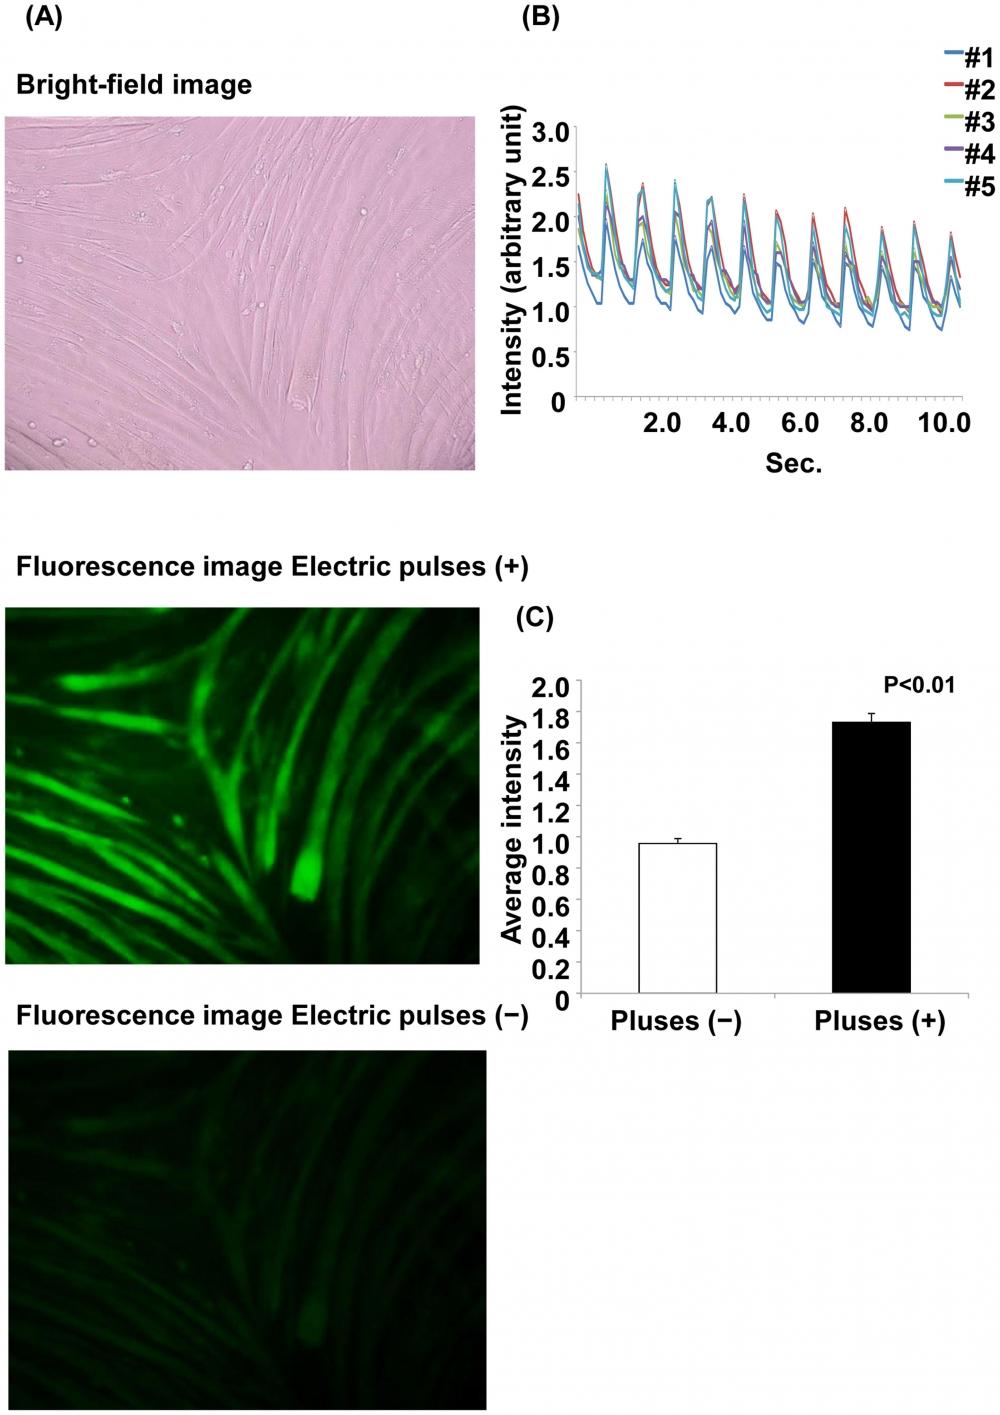 Ca2+ fluorescence with and without electrical stimulation. (A) Ca2+ fluorescence with and without electrical stimulation. Myotubes were treated with Fluo-8 dye loading solution 30 min before electrical stimulation. The images are shown at 200&times; magnification. The upper panel shows the bright-field image. The middle panel shows the myotubes with electric pulses, and the lower panel shows the myotubes without electric pulses. (B) Changes in Ca2+ fluorescence intensity with electrical stimulation. The fluorescence intensity was analyzed at 5 arbitrary points. Each line shows the raw fluorescence intensity data at each point. (C) The average fluorescence intensity for 11 s is shown. The average fluorescence intensity with electric pulses is significantly higher than that without electric pulses (p&lt;0.01, Student&rsquo;s t-test). Source: Graph from<em> Characterization of an Acute Muscle Contraction Model Using Cultured C2C12 Myotubes</em> by Yasuko Manabe et al., PLOS, Dec. 2012.